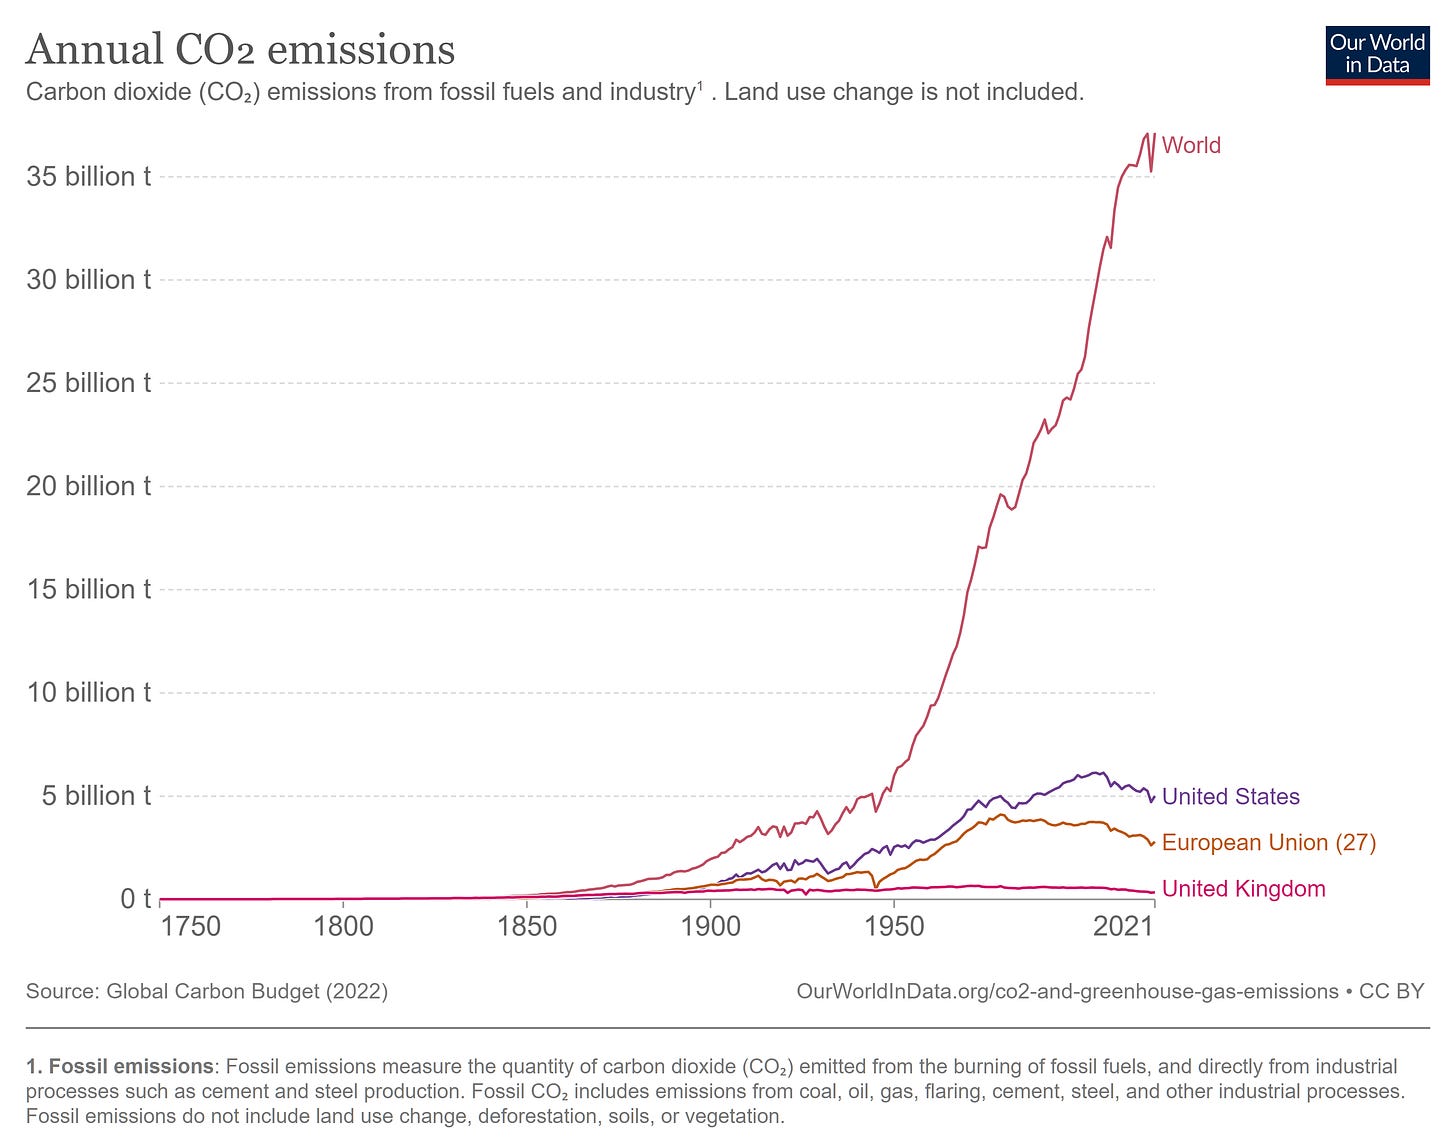 Figure 9 - Annual CO2 Emissions by Country and Region